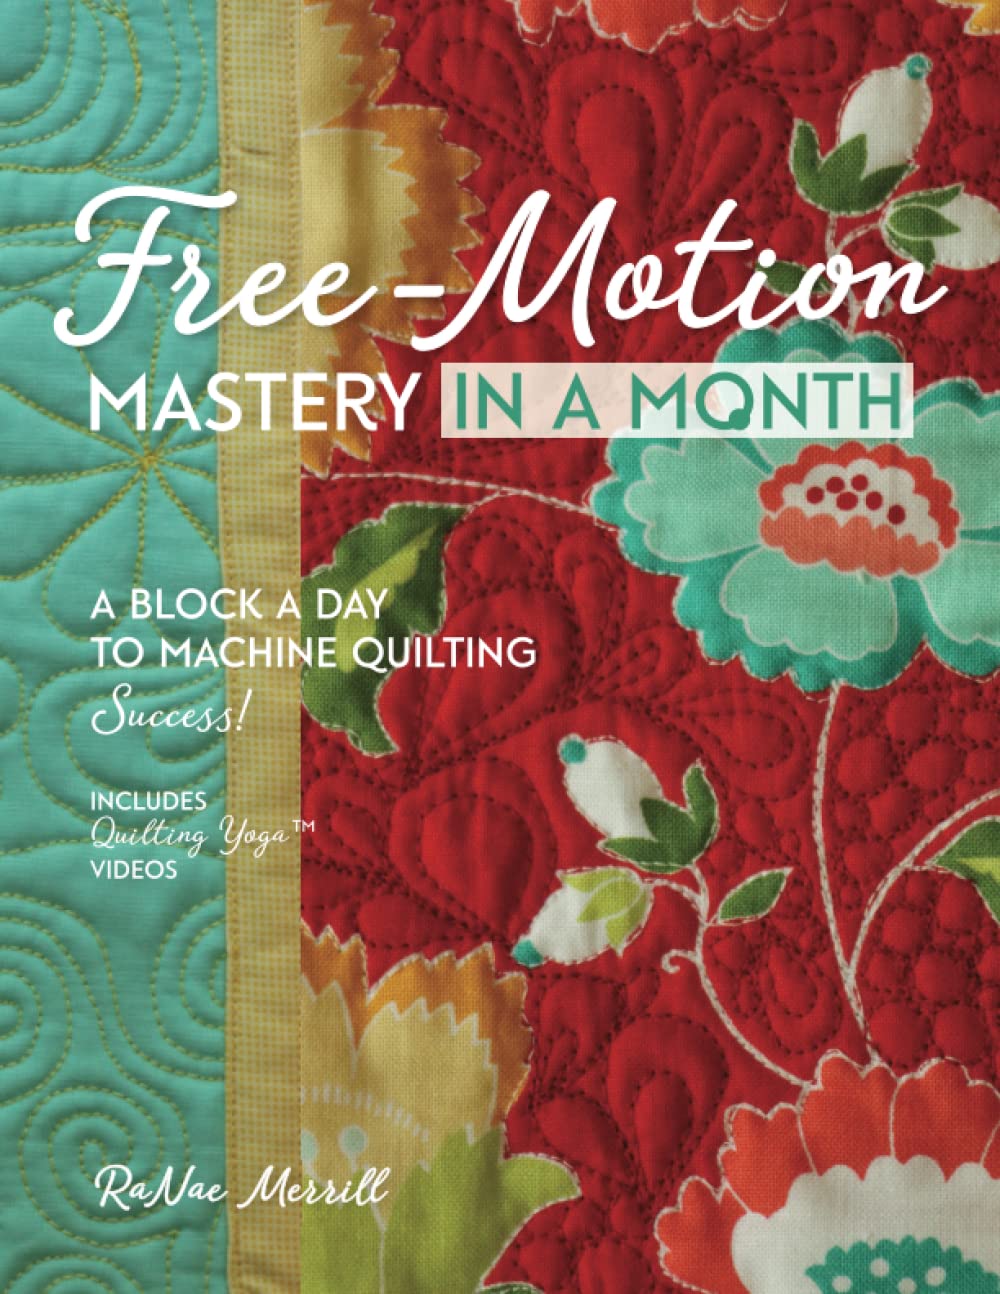 Machine Mastery in a Month - by RaNae Merrill